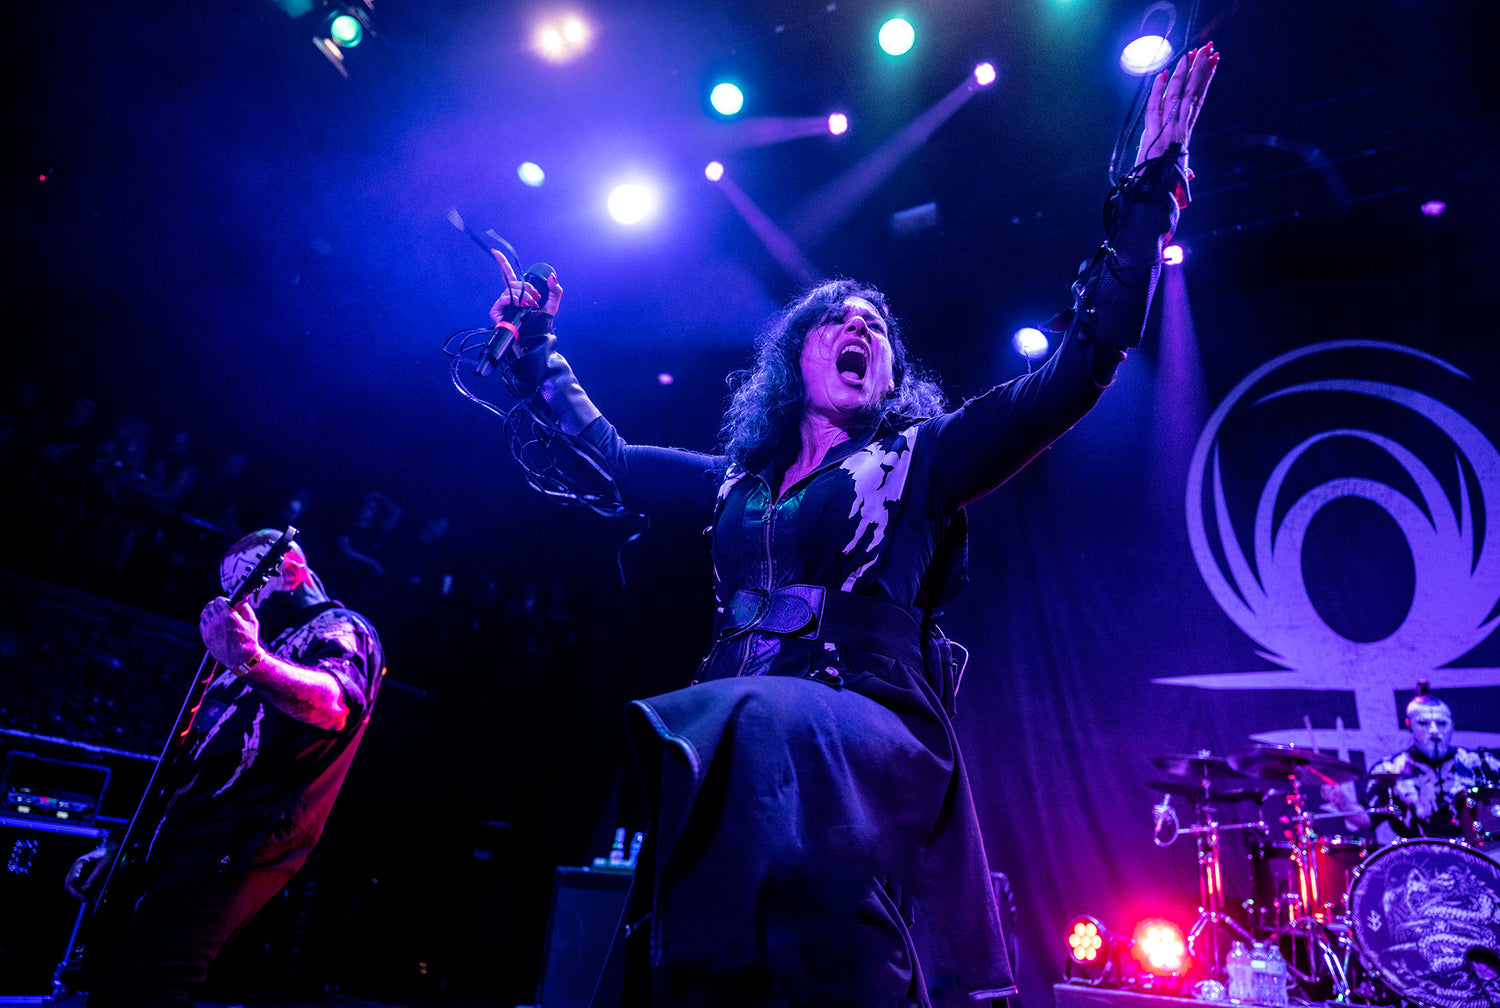 Lacuna Coil take their victory lap with commanding closing set on their West Coast tour